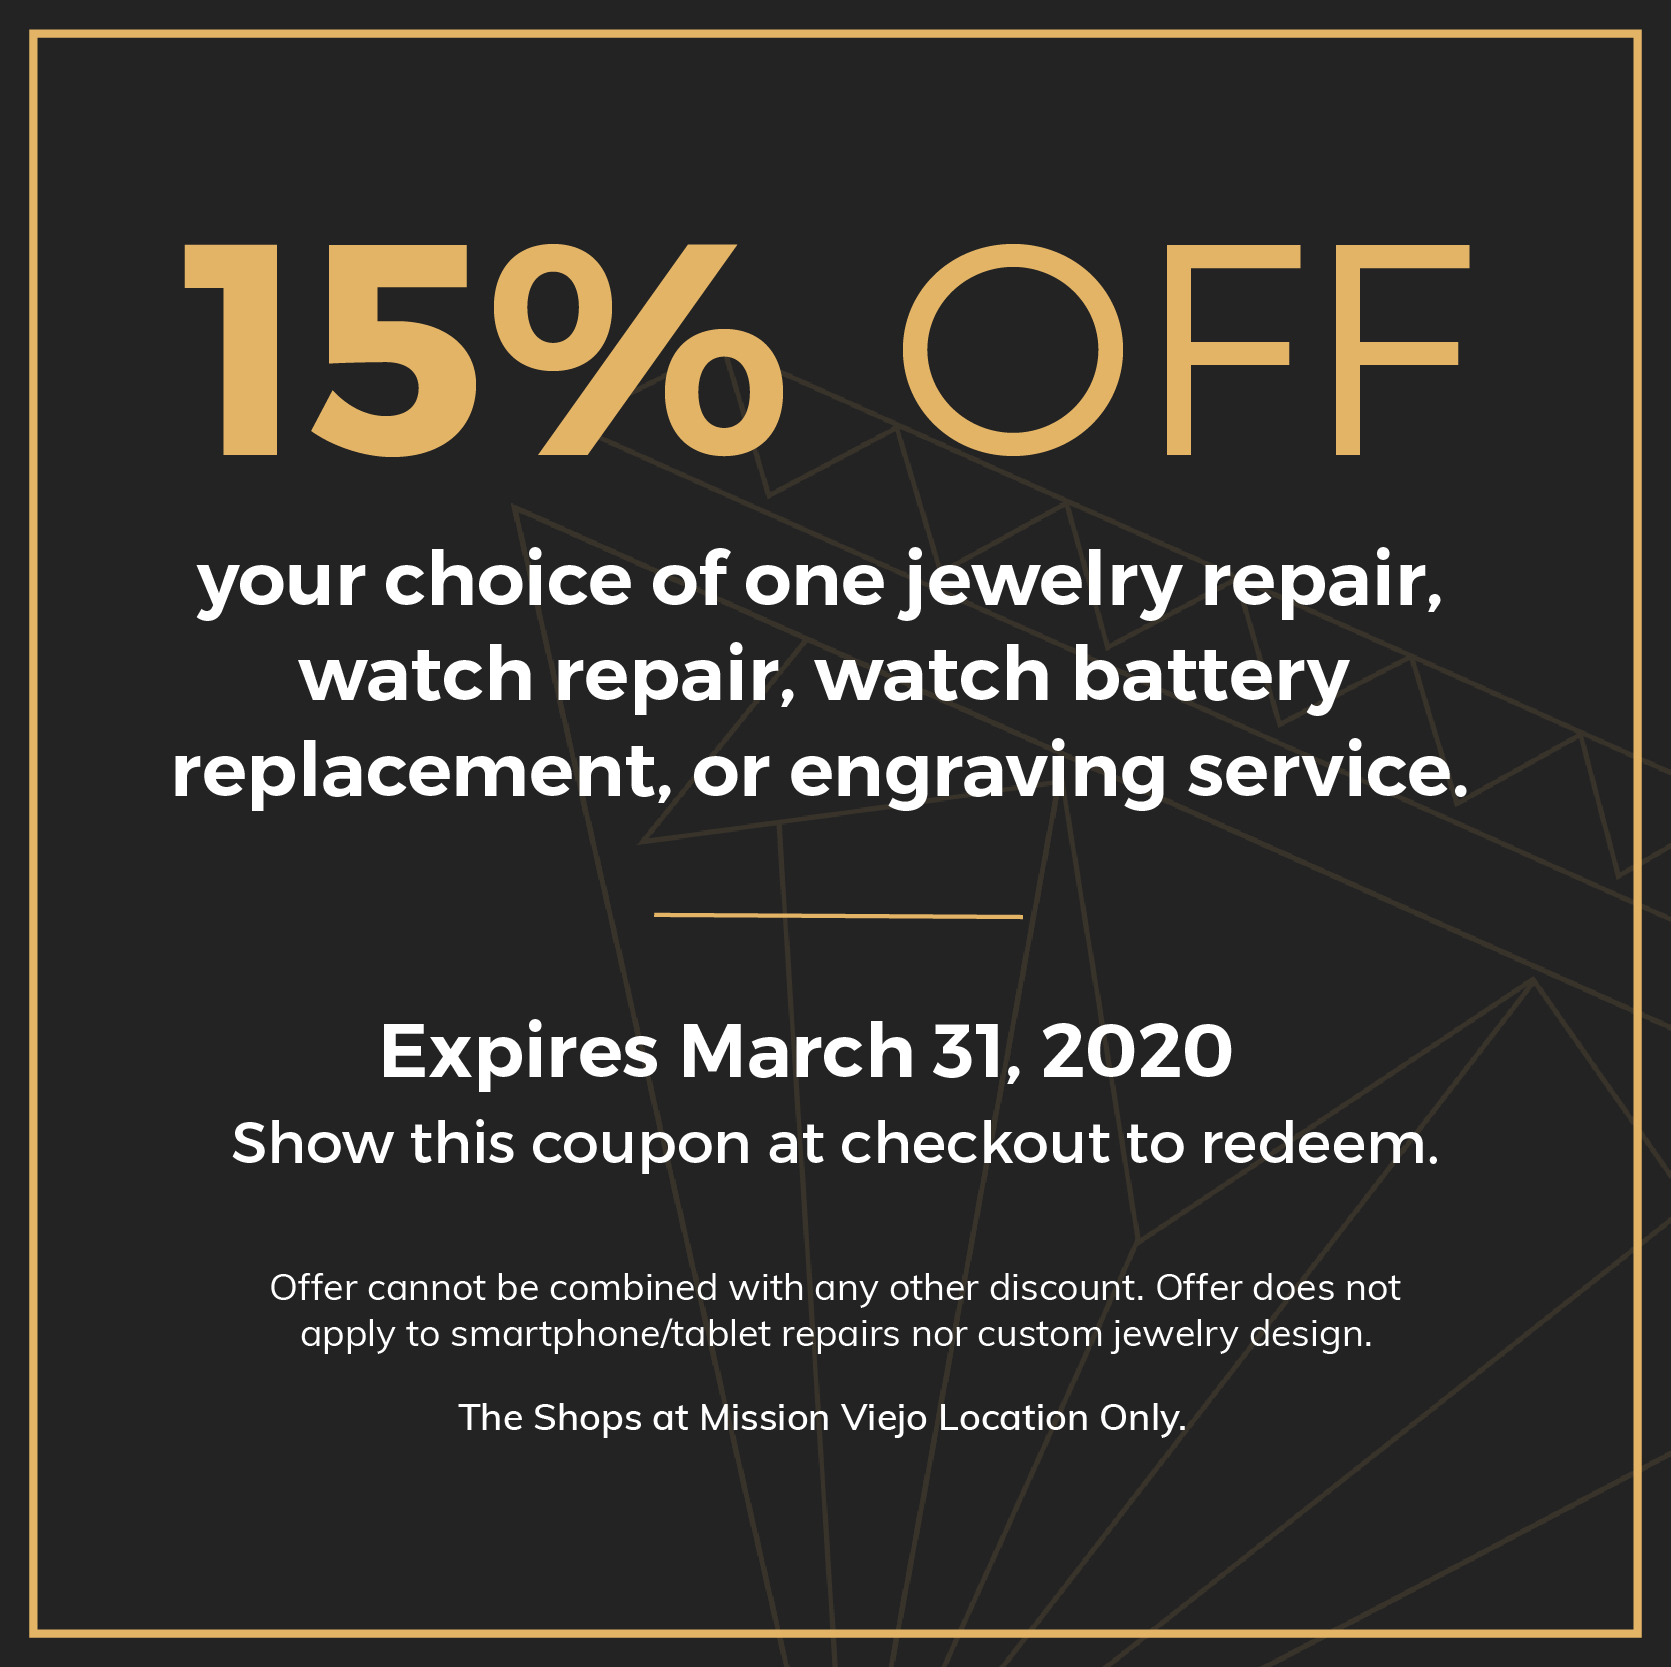 15% OFF. your choice of one jewelry repair, watch repair, watch battery replacement, or engraving service. Expires March 31, 2020. Show this coupon at checkout to redeem. Offer cannot be combined with any other discount. Offer does not apply to smartphone/tablet repairs nor custom jewelry design. The Shops at Mission Viejo Location Only.